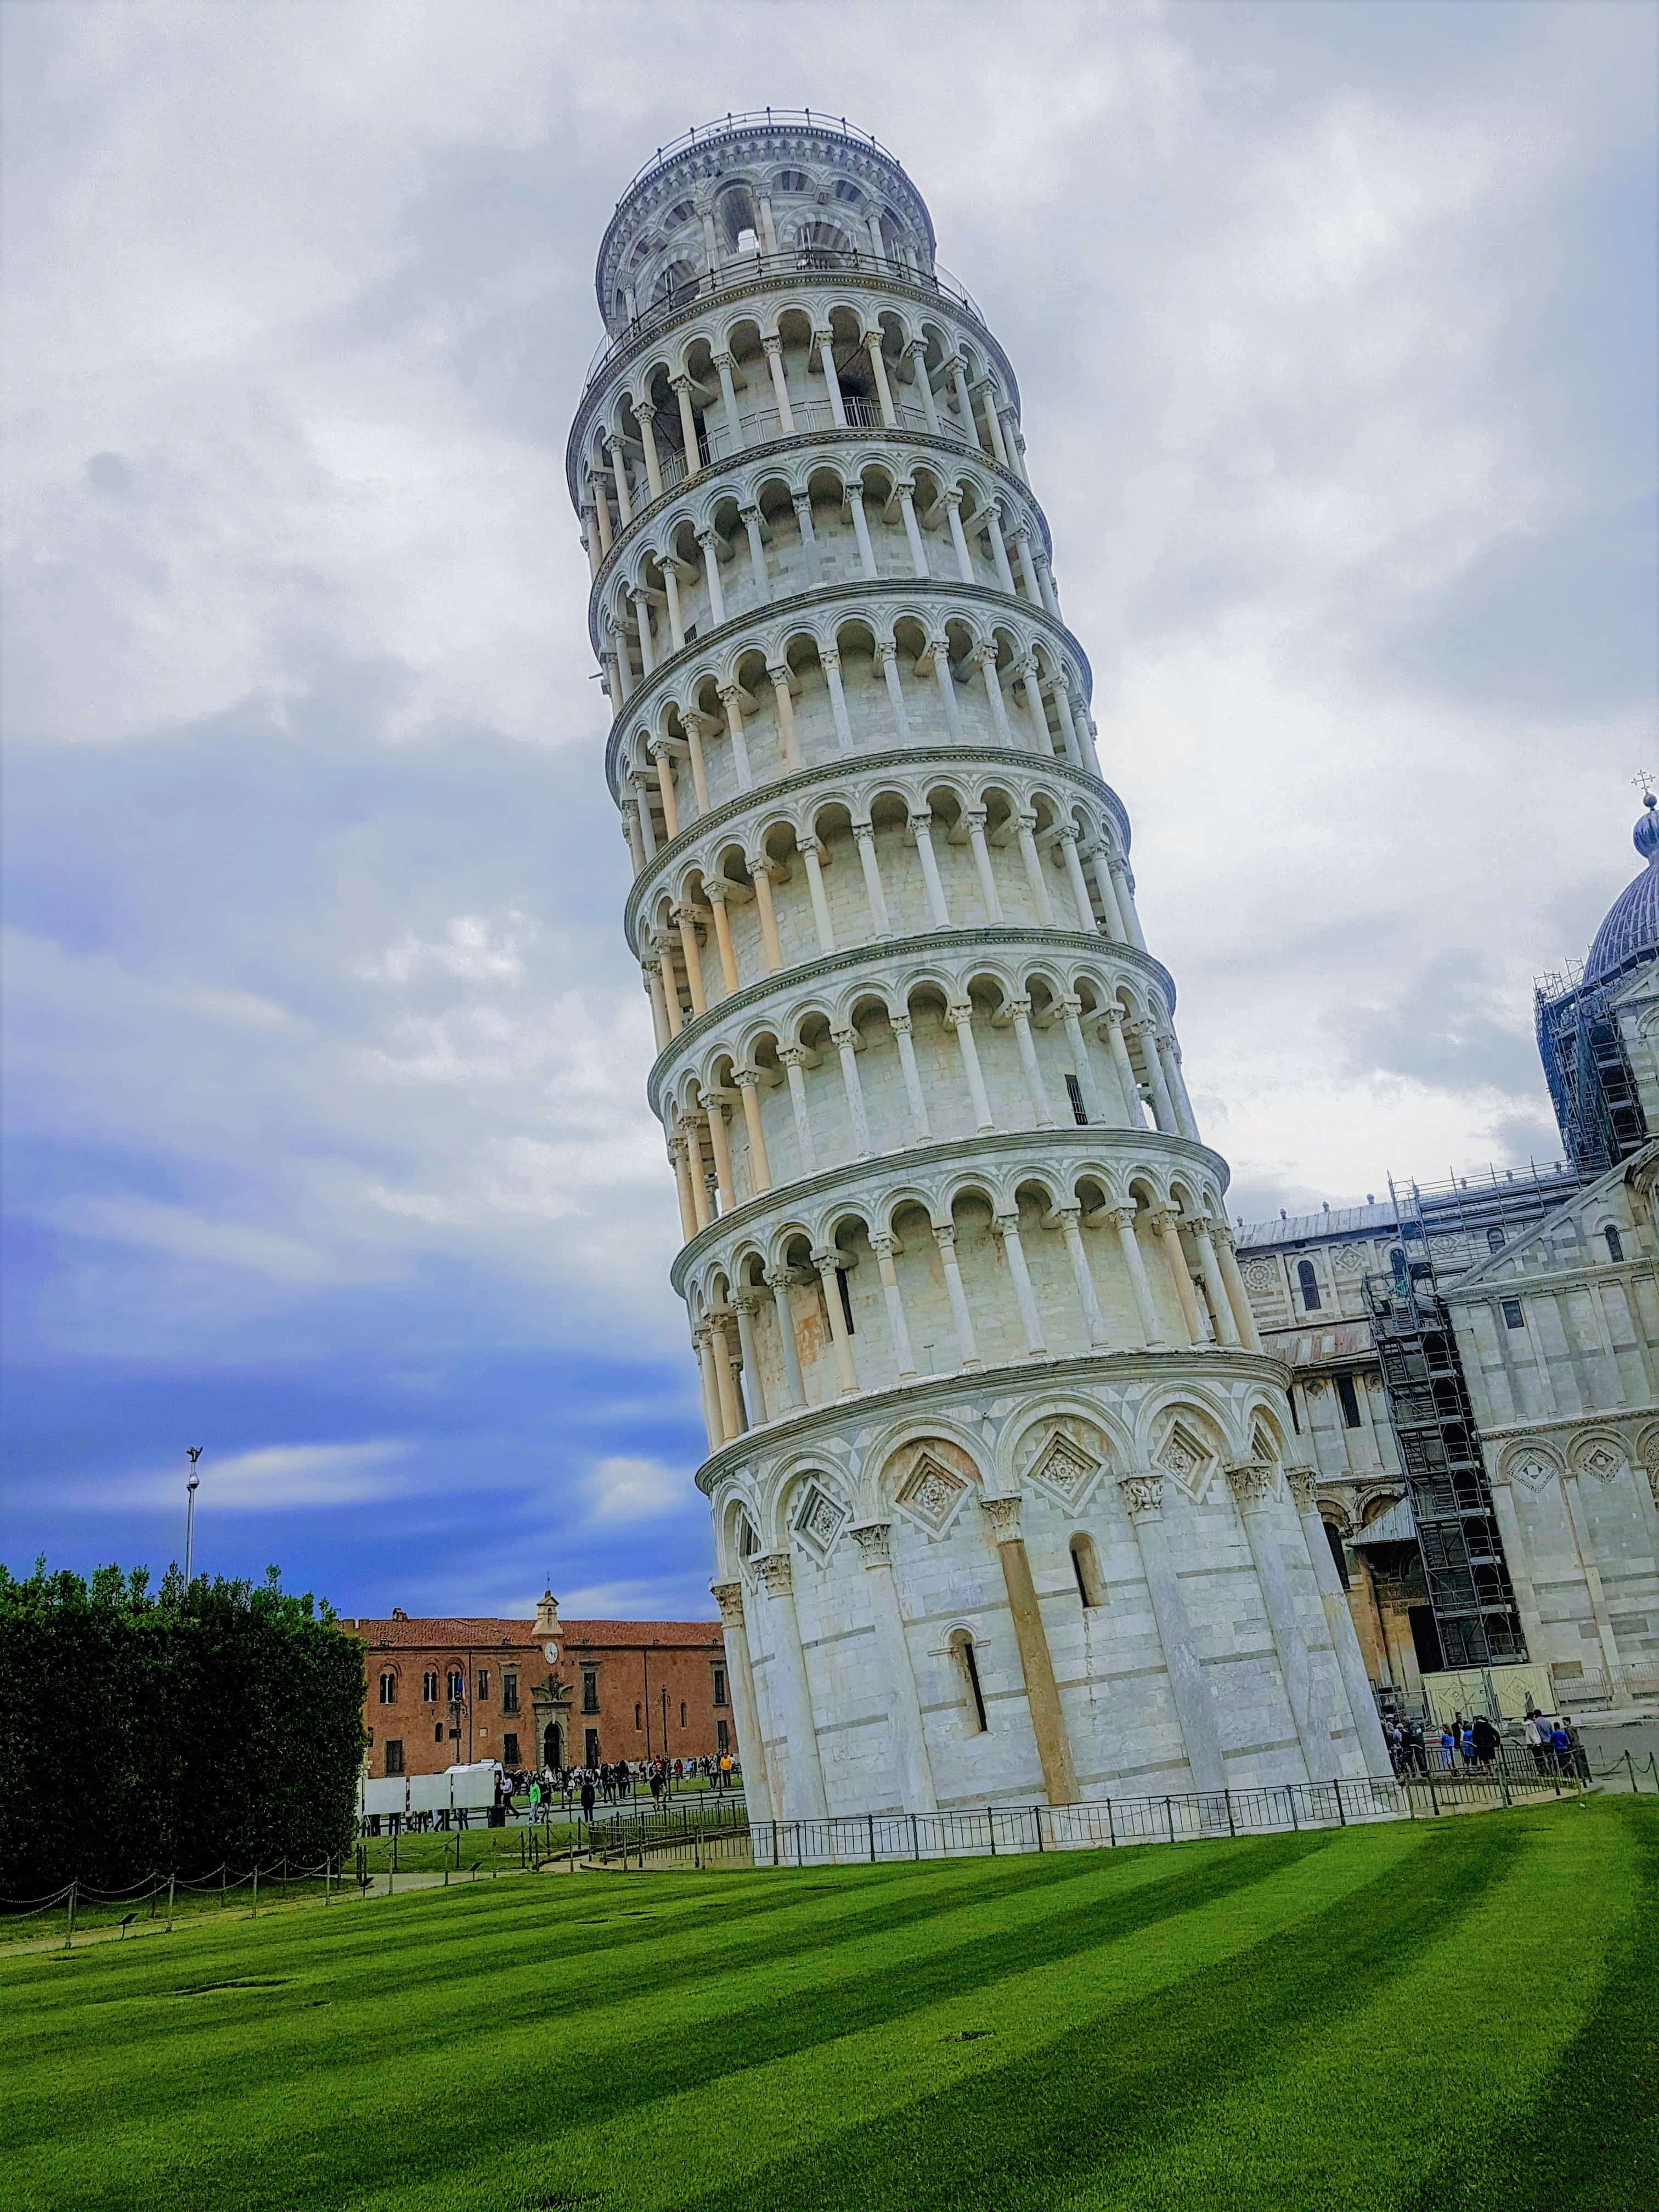 The Leaning Tower of Pisa Travel tips, things to do